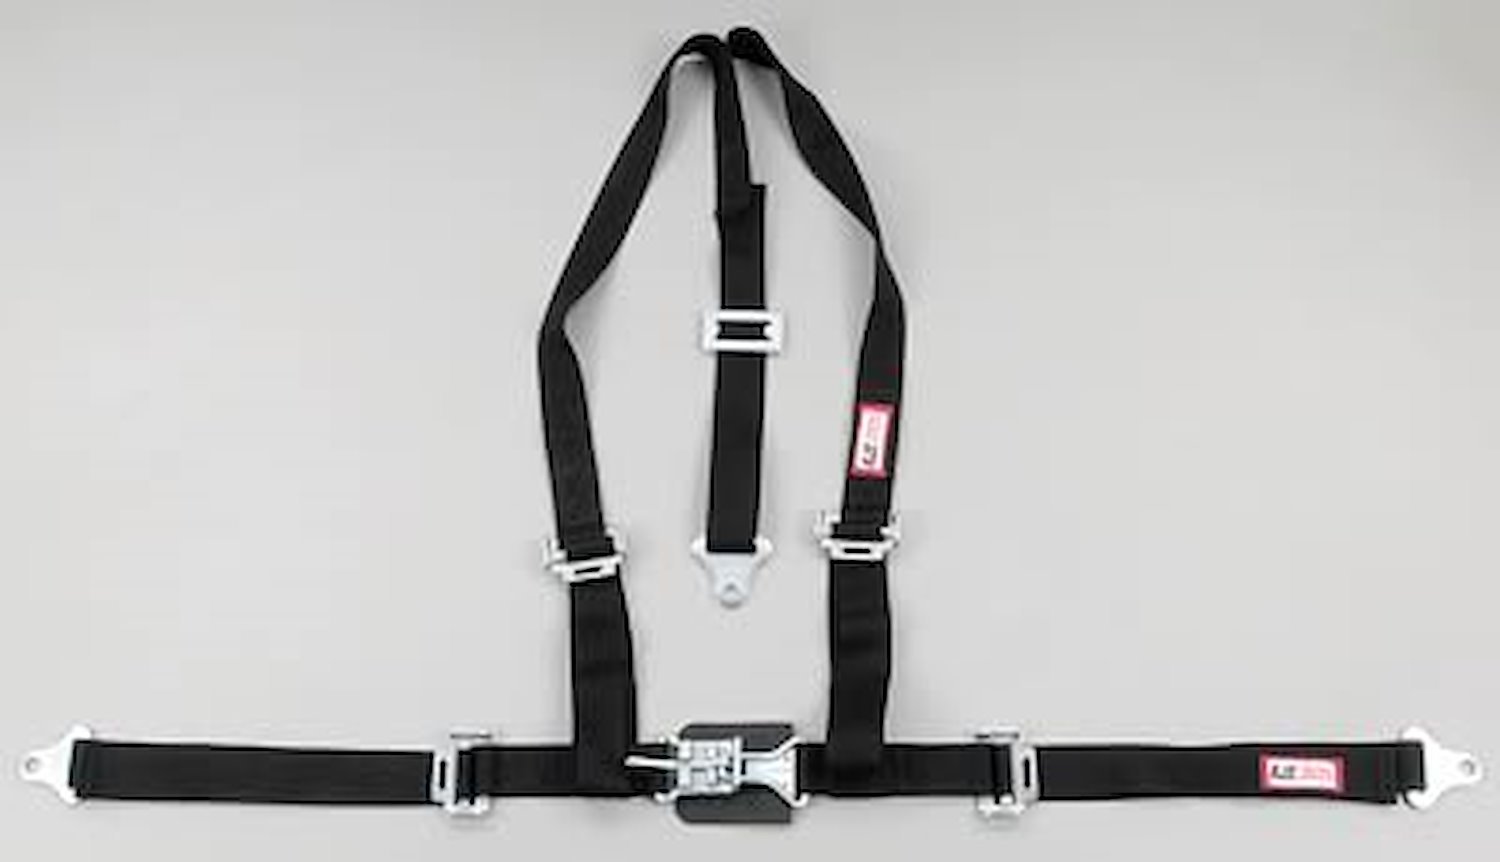 NON-SFI L&L HARNESS 3 PULL UP Lap Belt SNAP SEWN IN 2 S.H. Individual FLOOR Mount w/STERNUM STRAP WRAP/SNAP HOT PINK